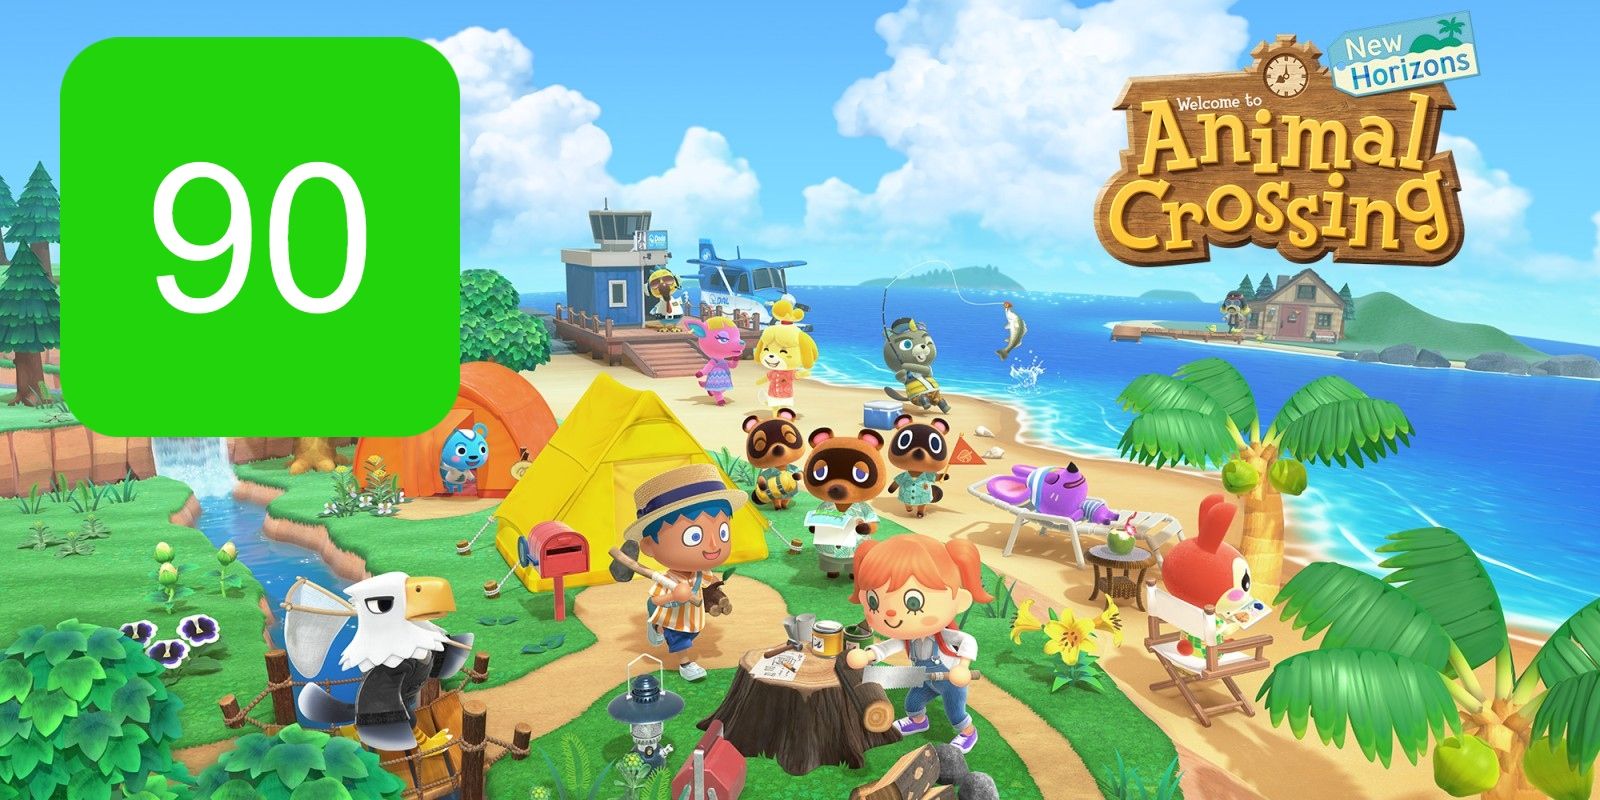 The Switch Metascore for Animal Crossing New Horizons